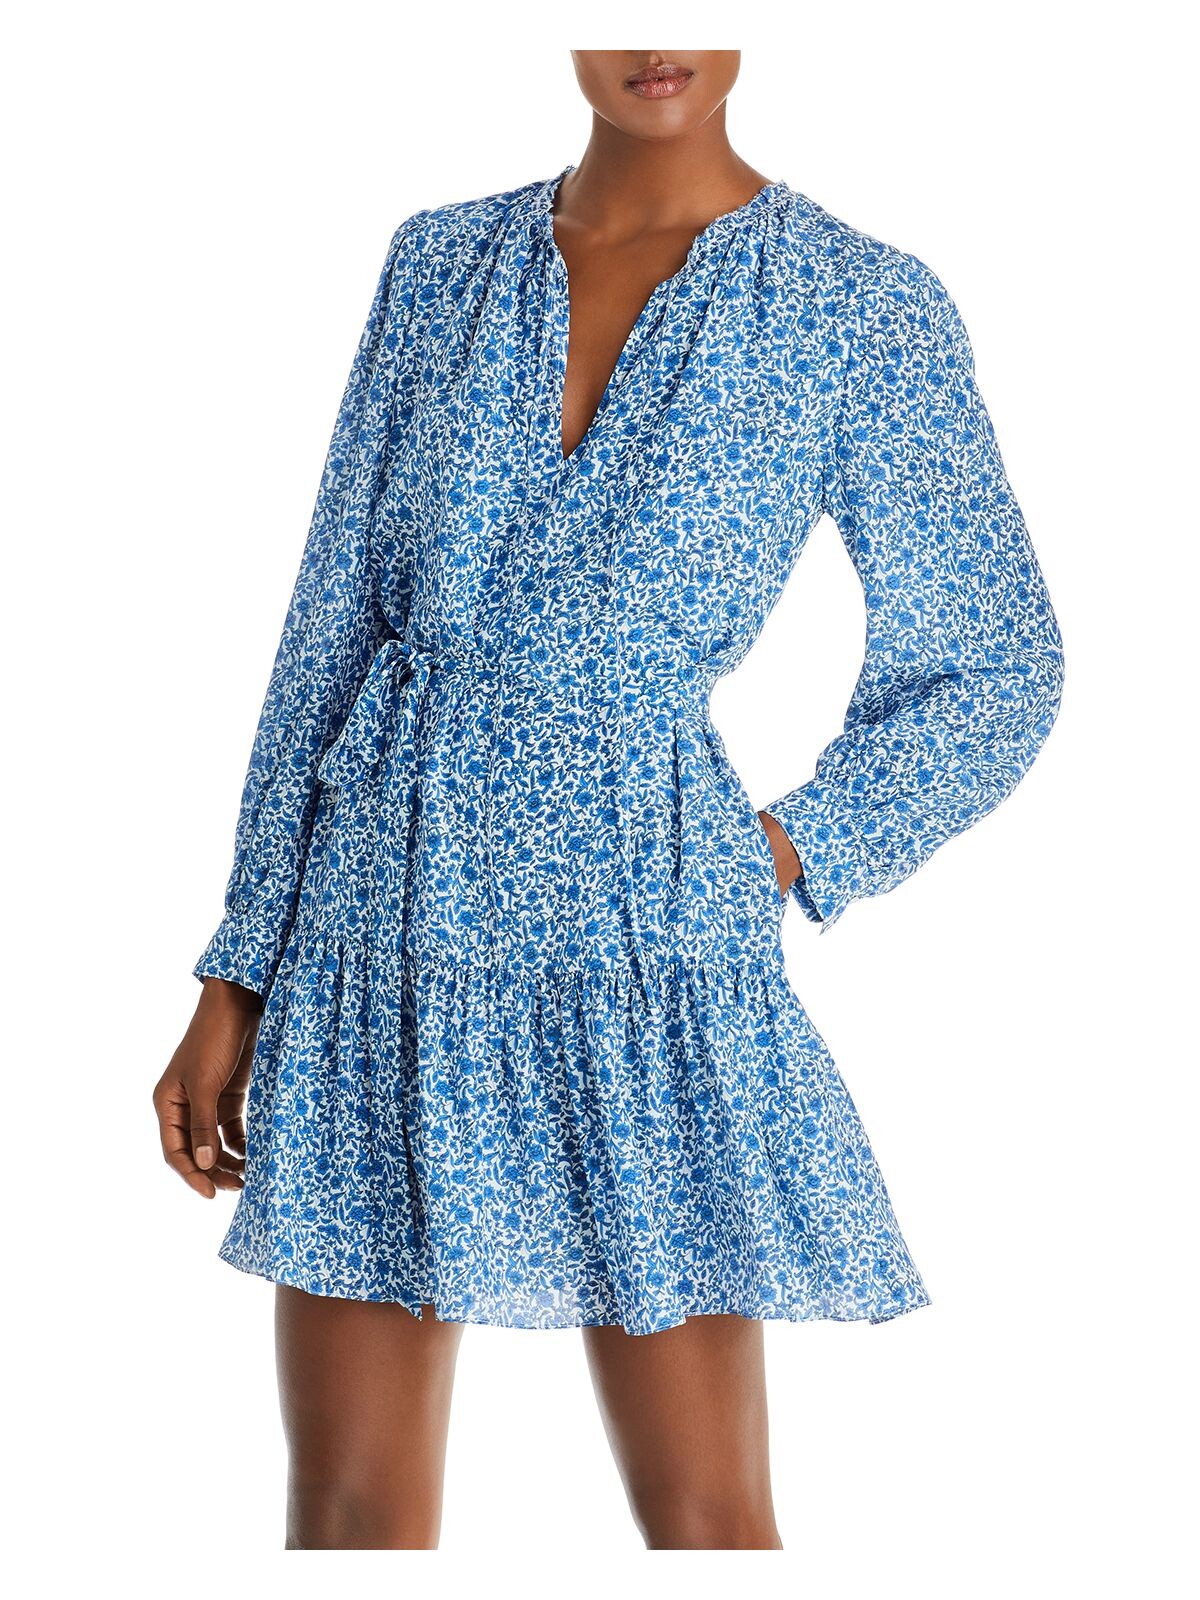 REBECCA TAYLOR Womens Blue Tie Lined Floral Long Sleeve V Neck Mini Ruffled Dress XS